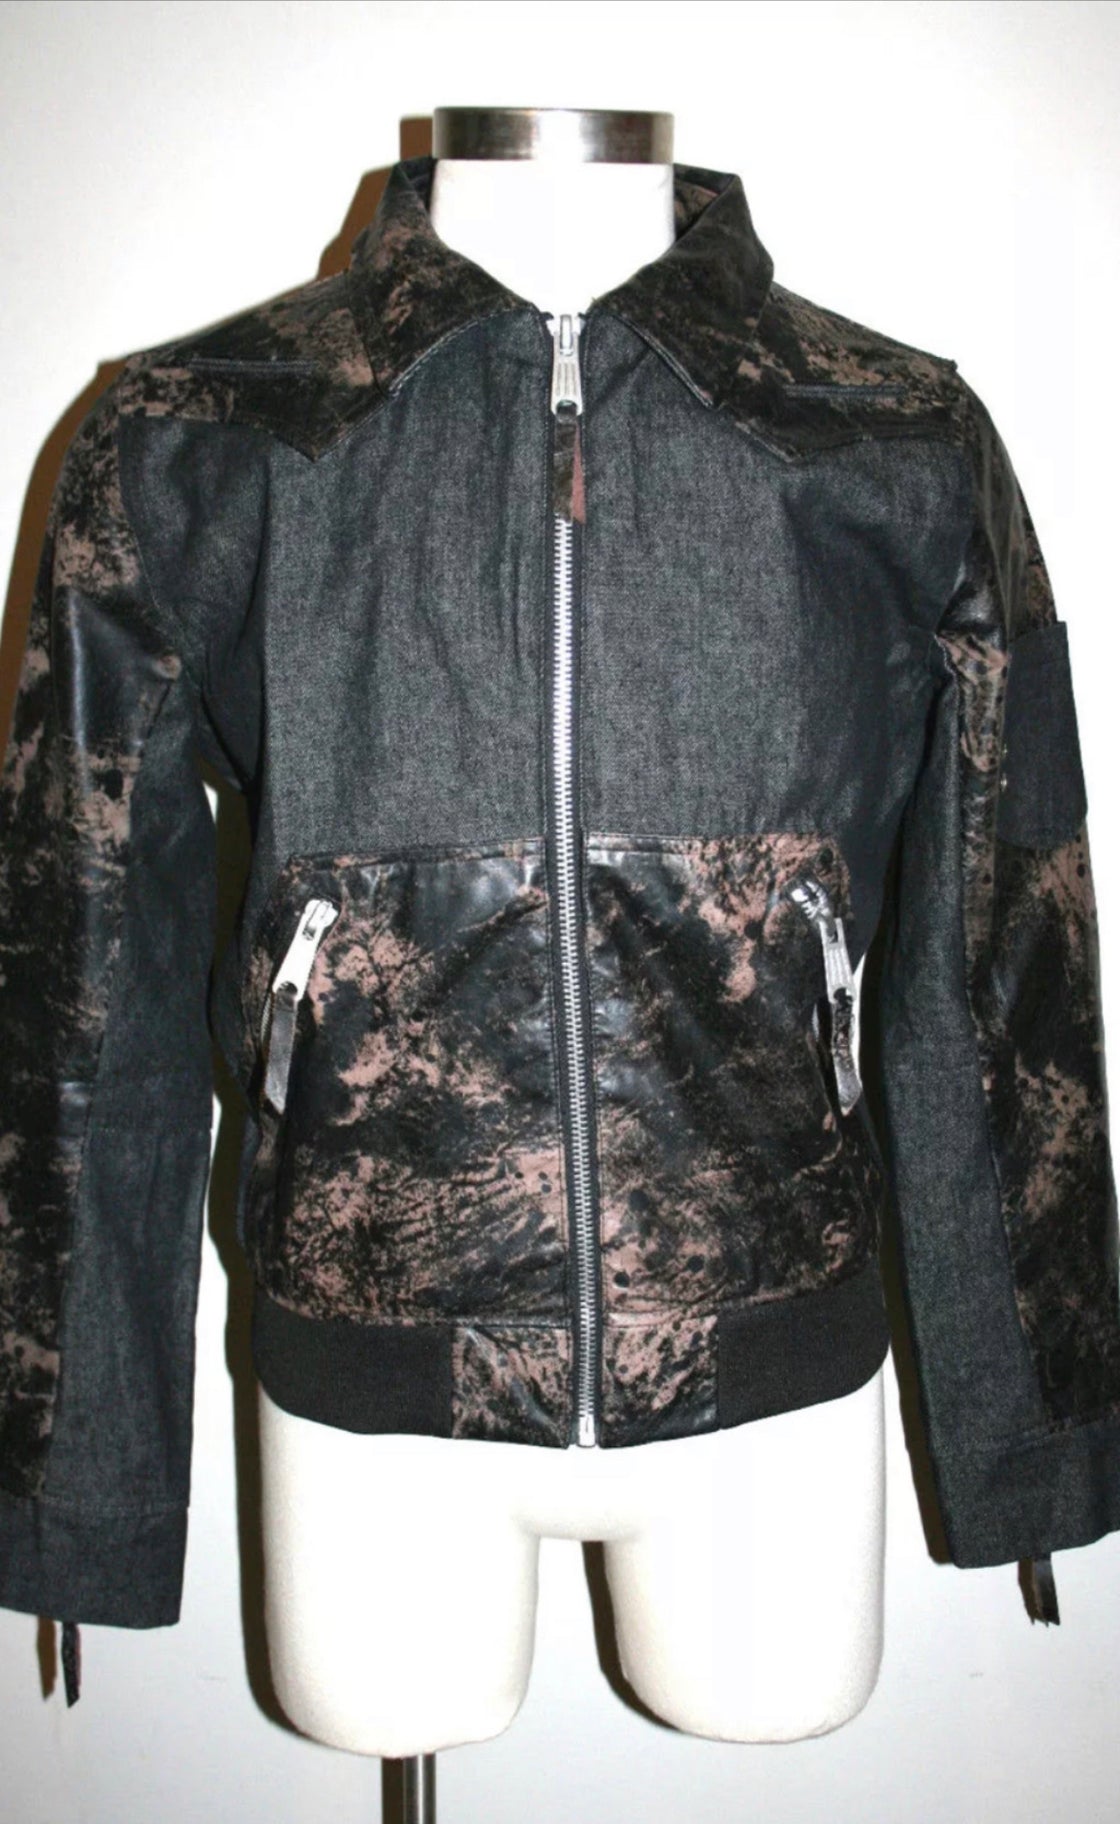 REDD’s DENIM AND DISTRESSED LEATHER JACKETS UNISEX